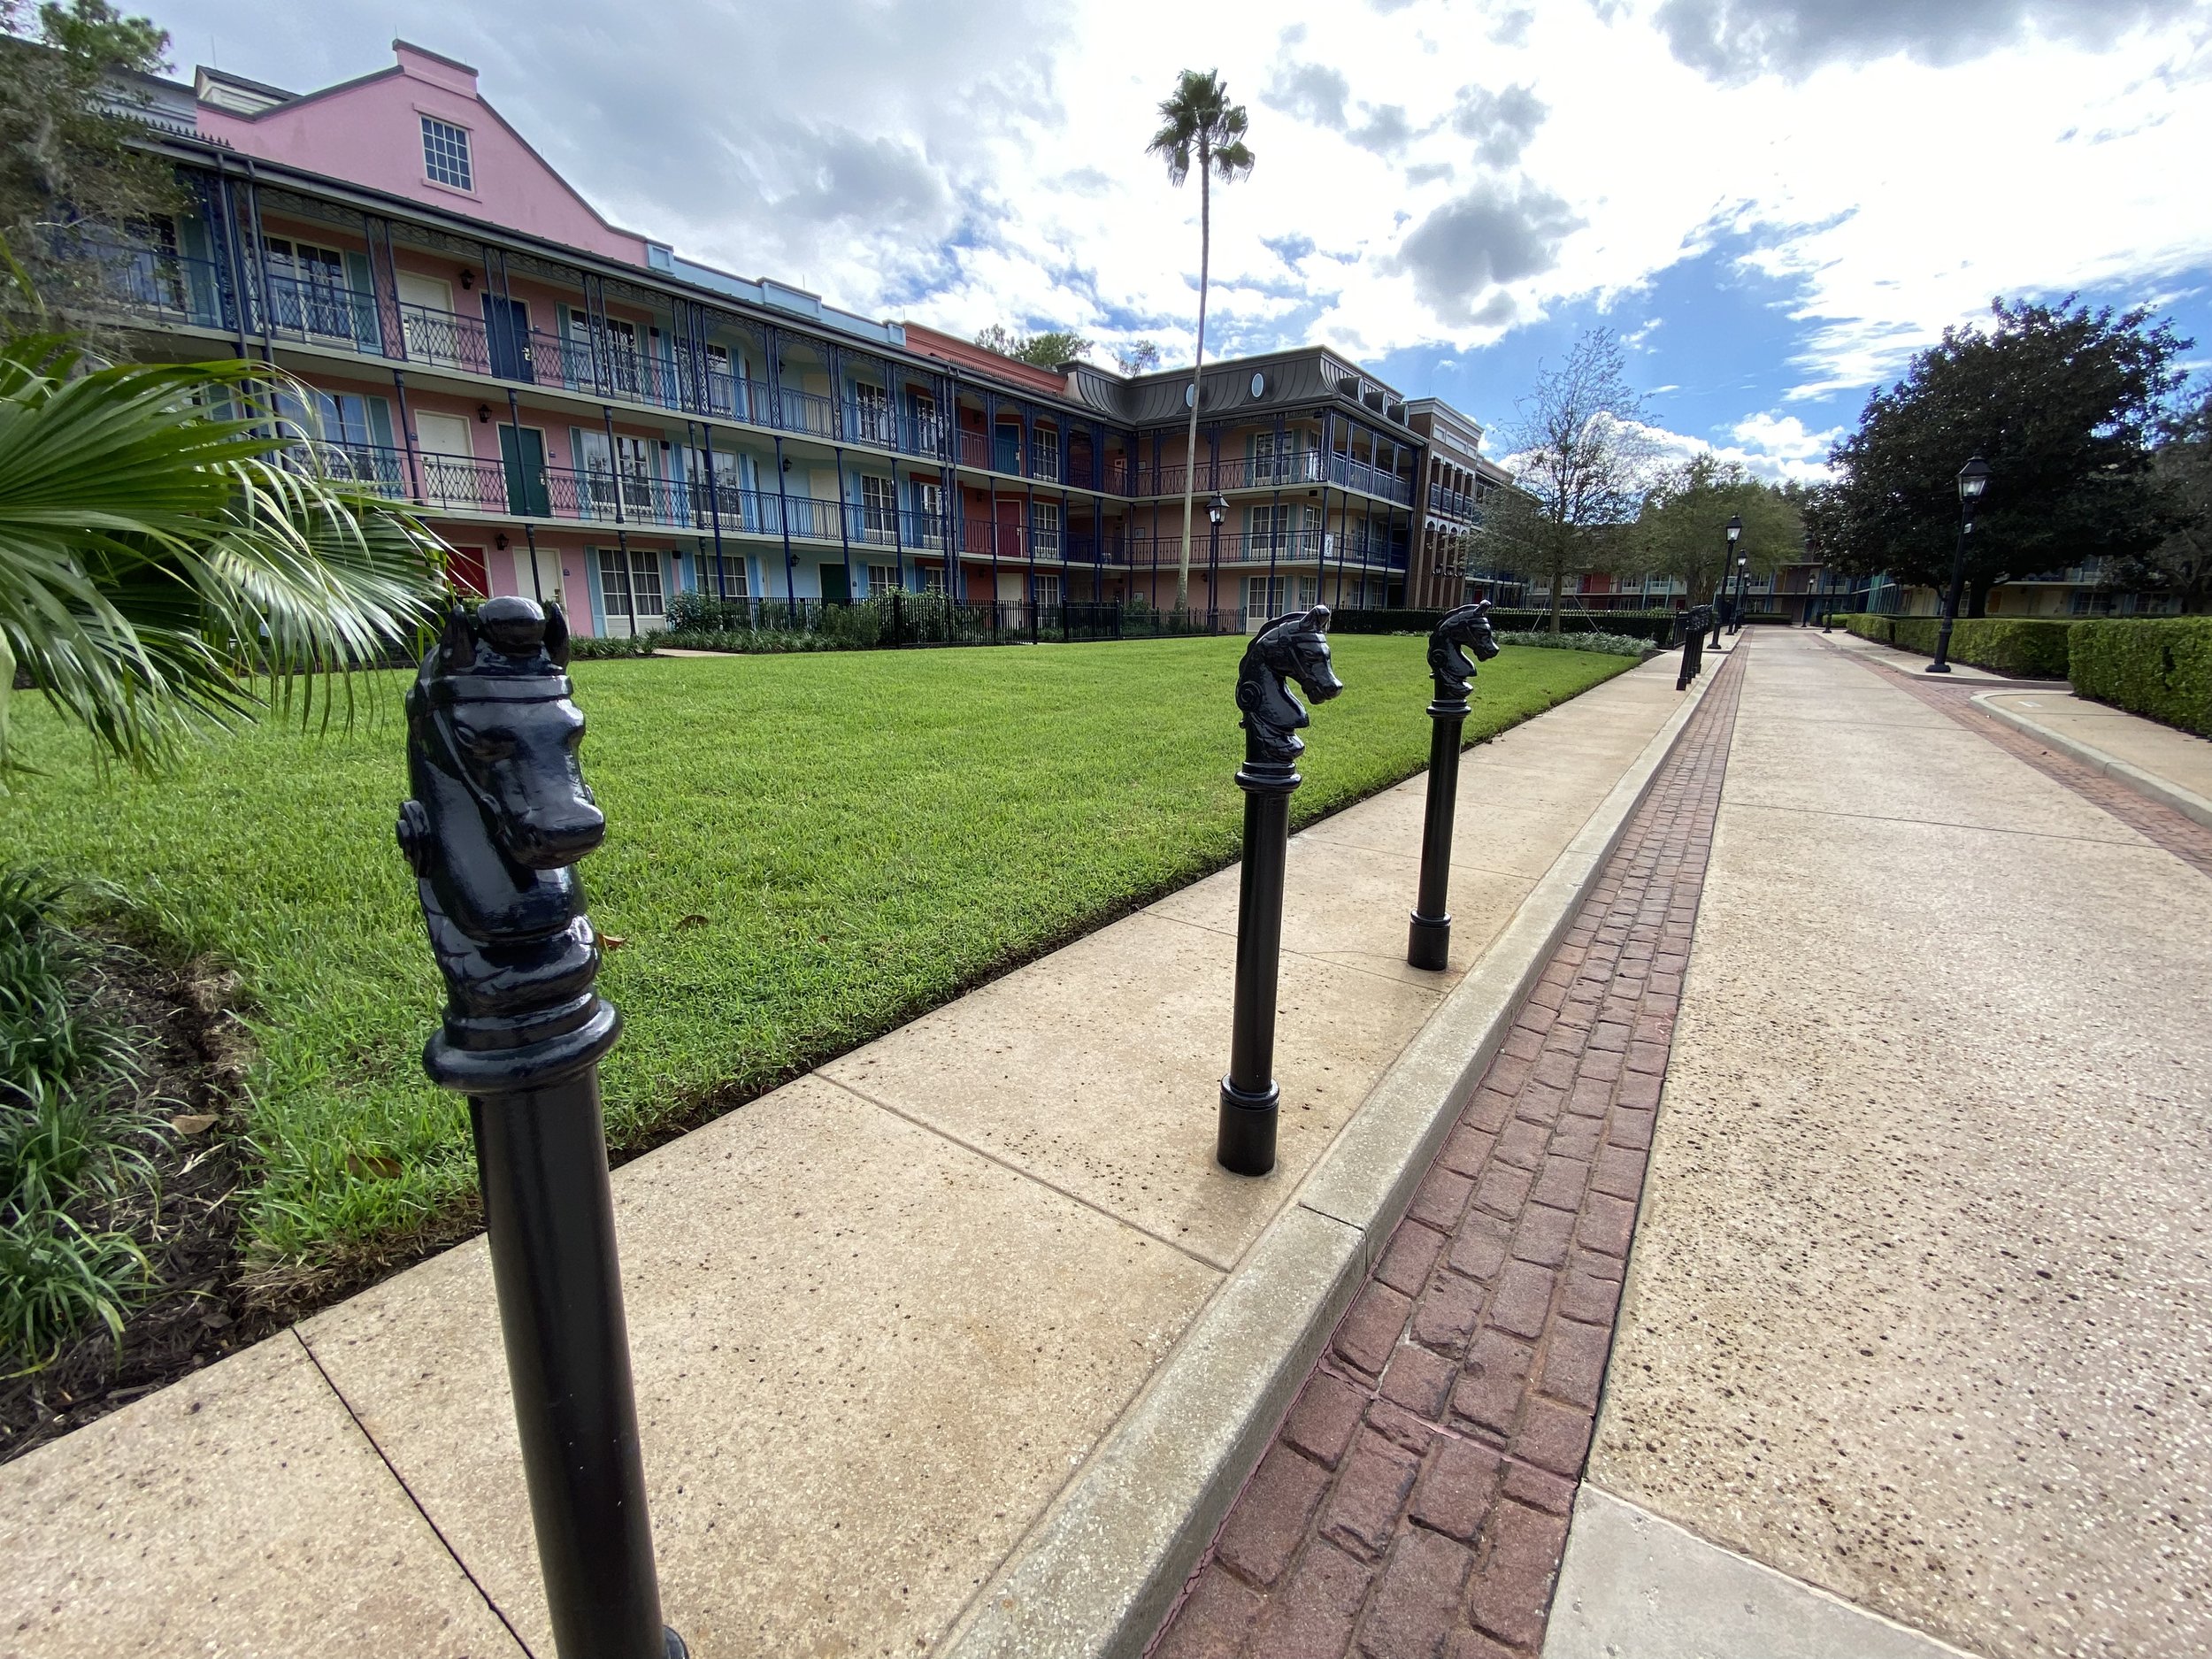  I love all the pathways around Port Orleans French Quarter. They’re designed to look like the streets in New Orleans. Even the manhole covers say “City of New Orleans” on them.  